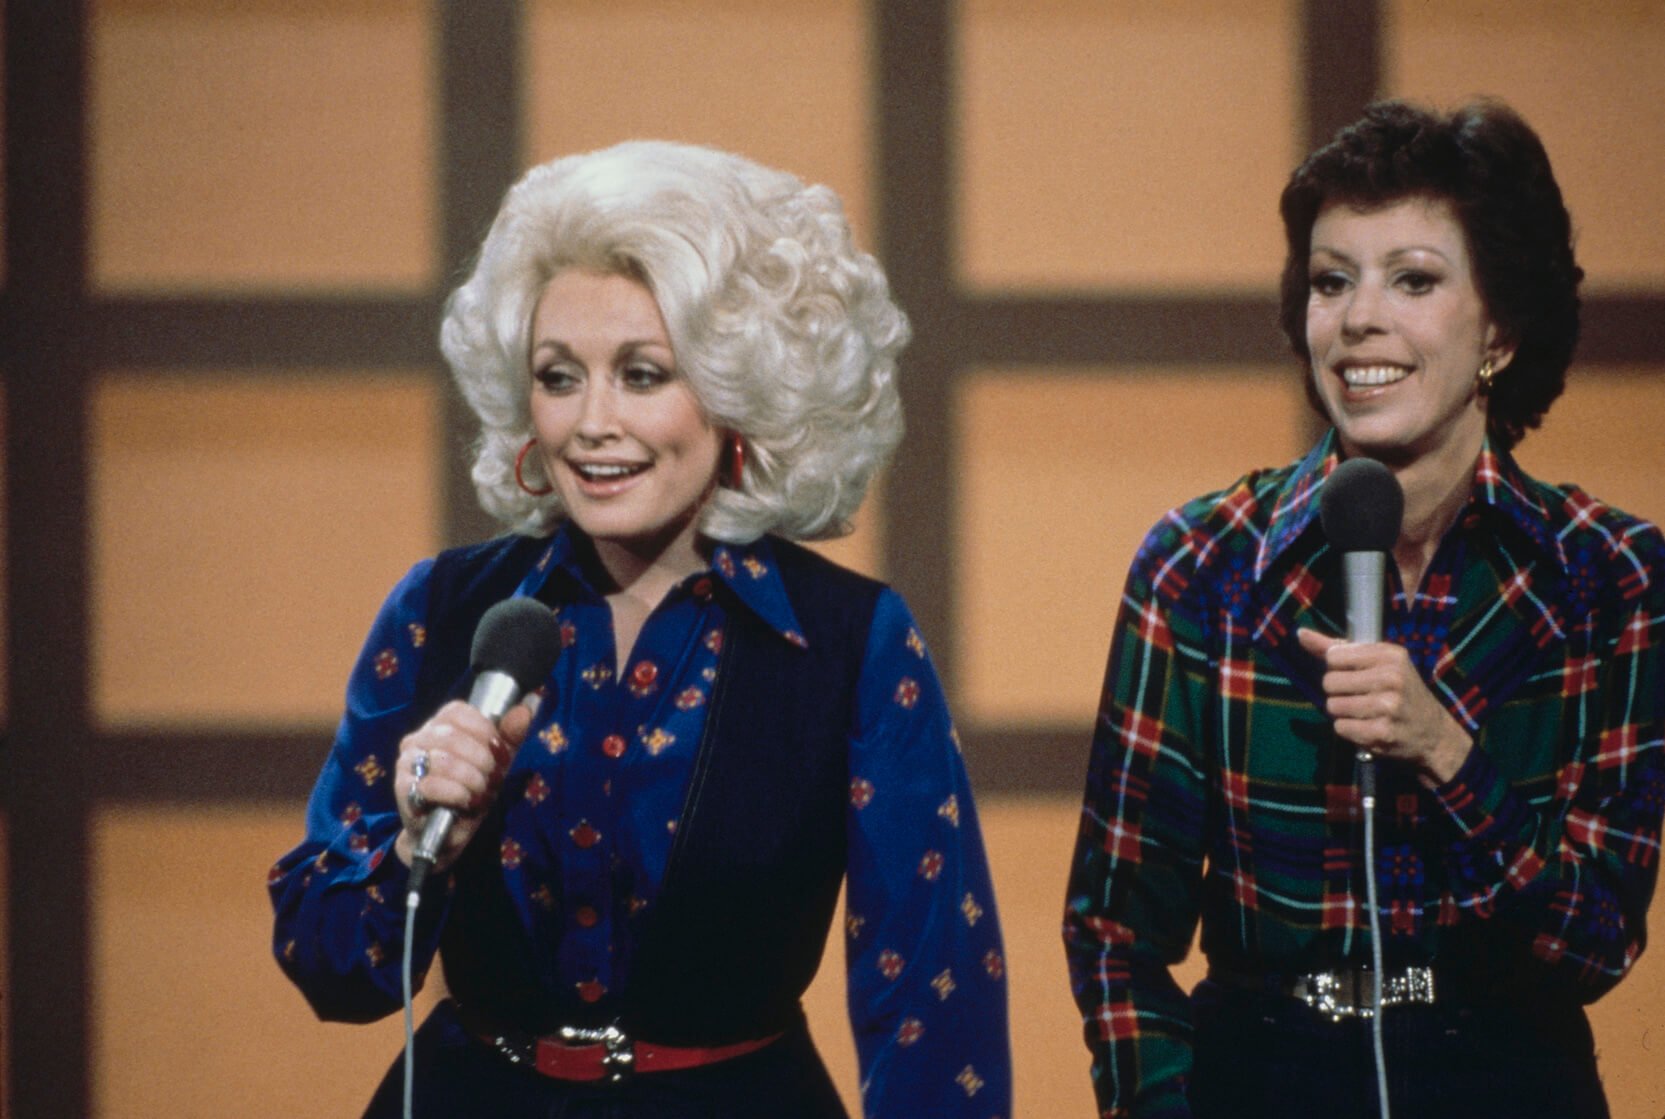 Dolly Parton holding a microphone and standing in front of Carol Burnett